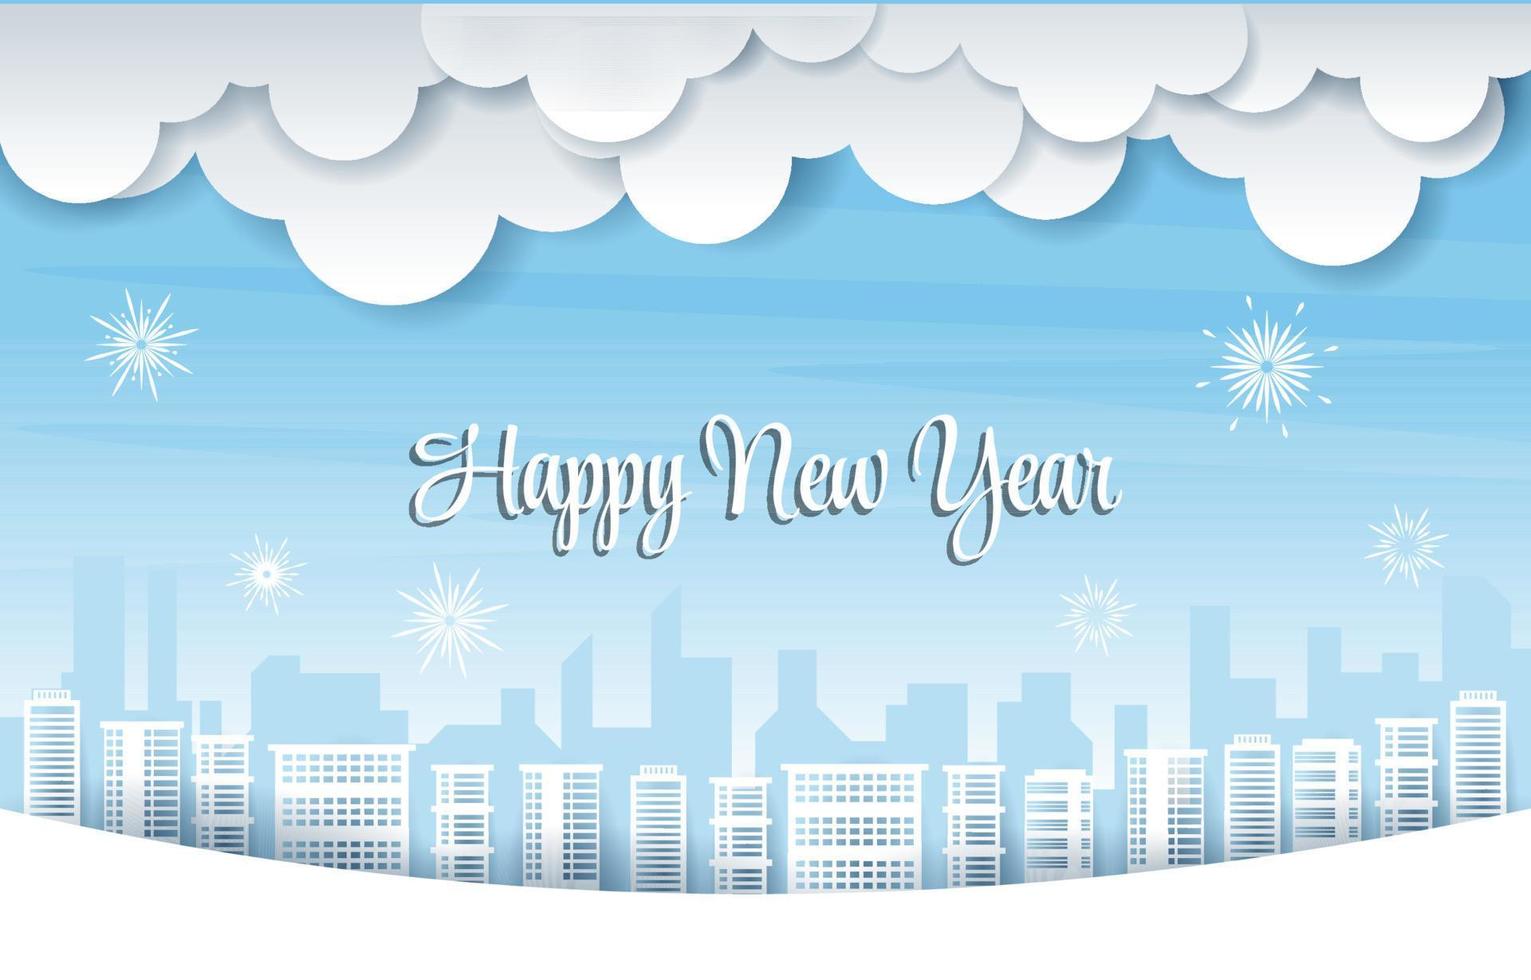 Fireworks City Building Cloud Winter New Year Paper Cut Illustration vector